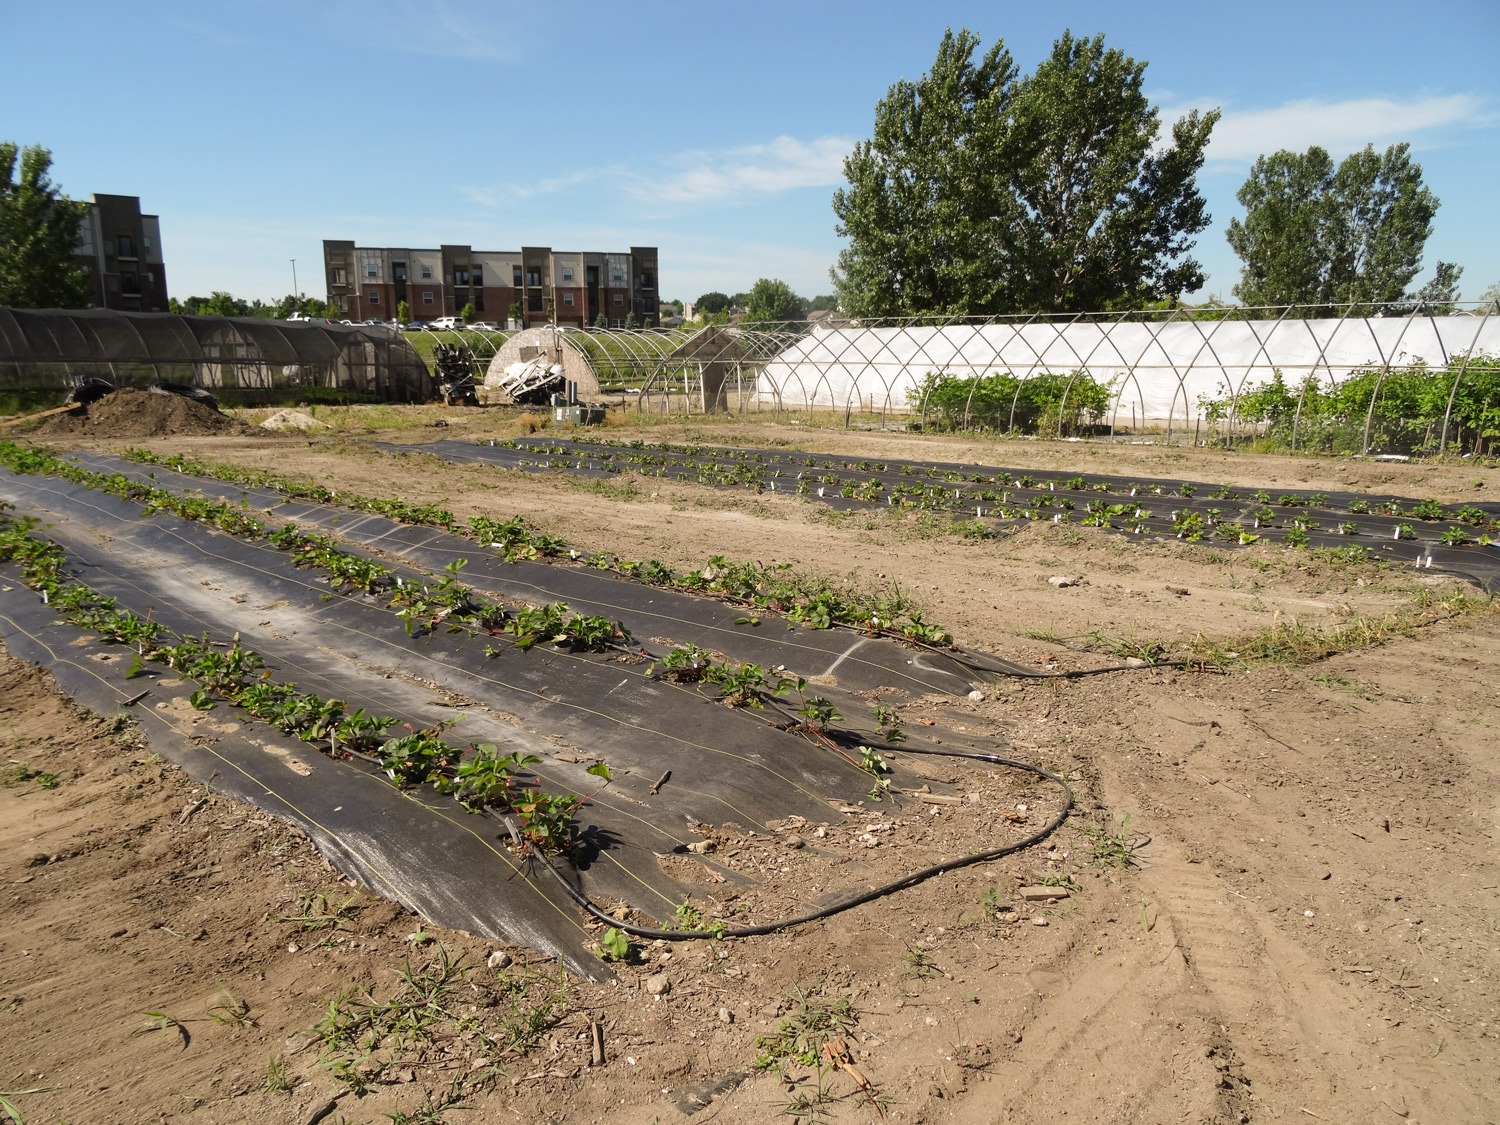 Open field area being use for strawberry production.